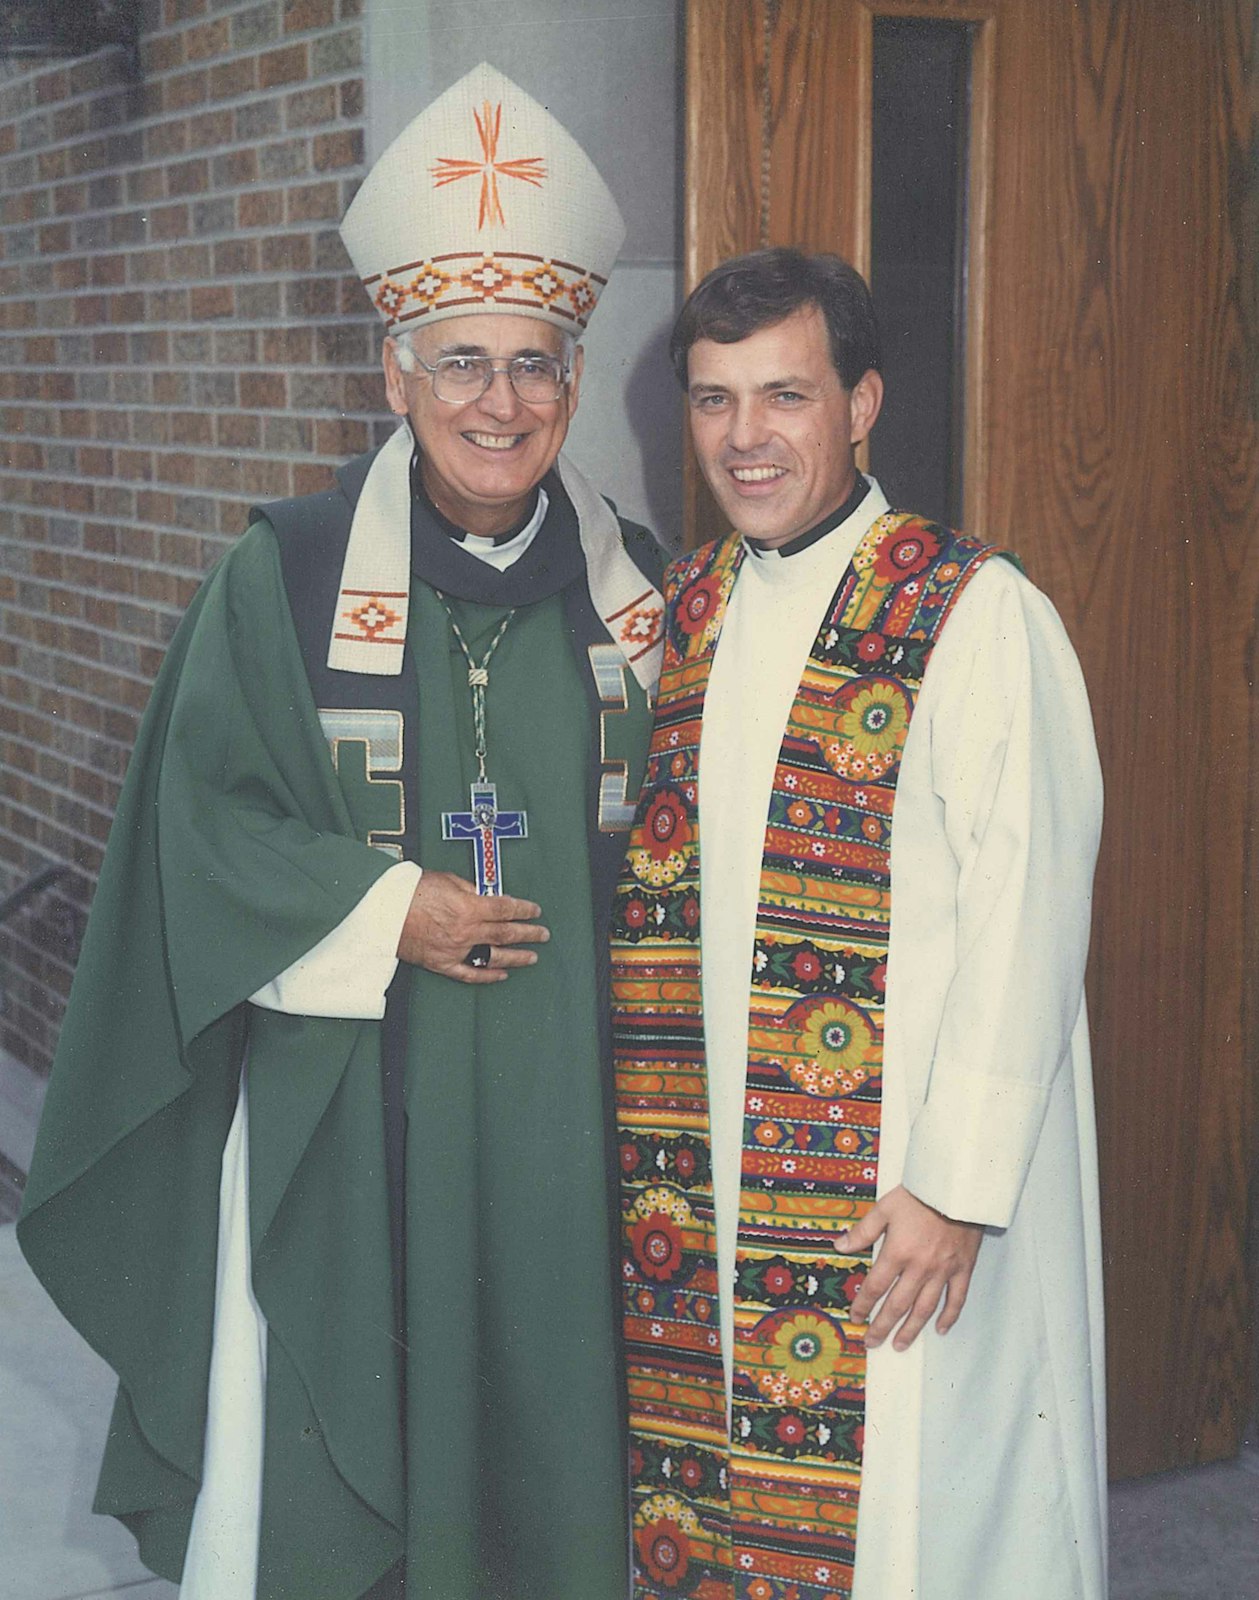 Fr. Donald Hanchon is pictured with Bishop Walter Schoenherr, then-rector of the cathedral and a mentor in Bishop Hanchon's young priesthood.